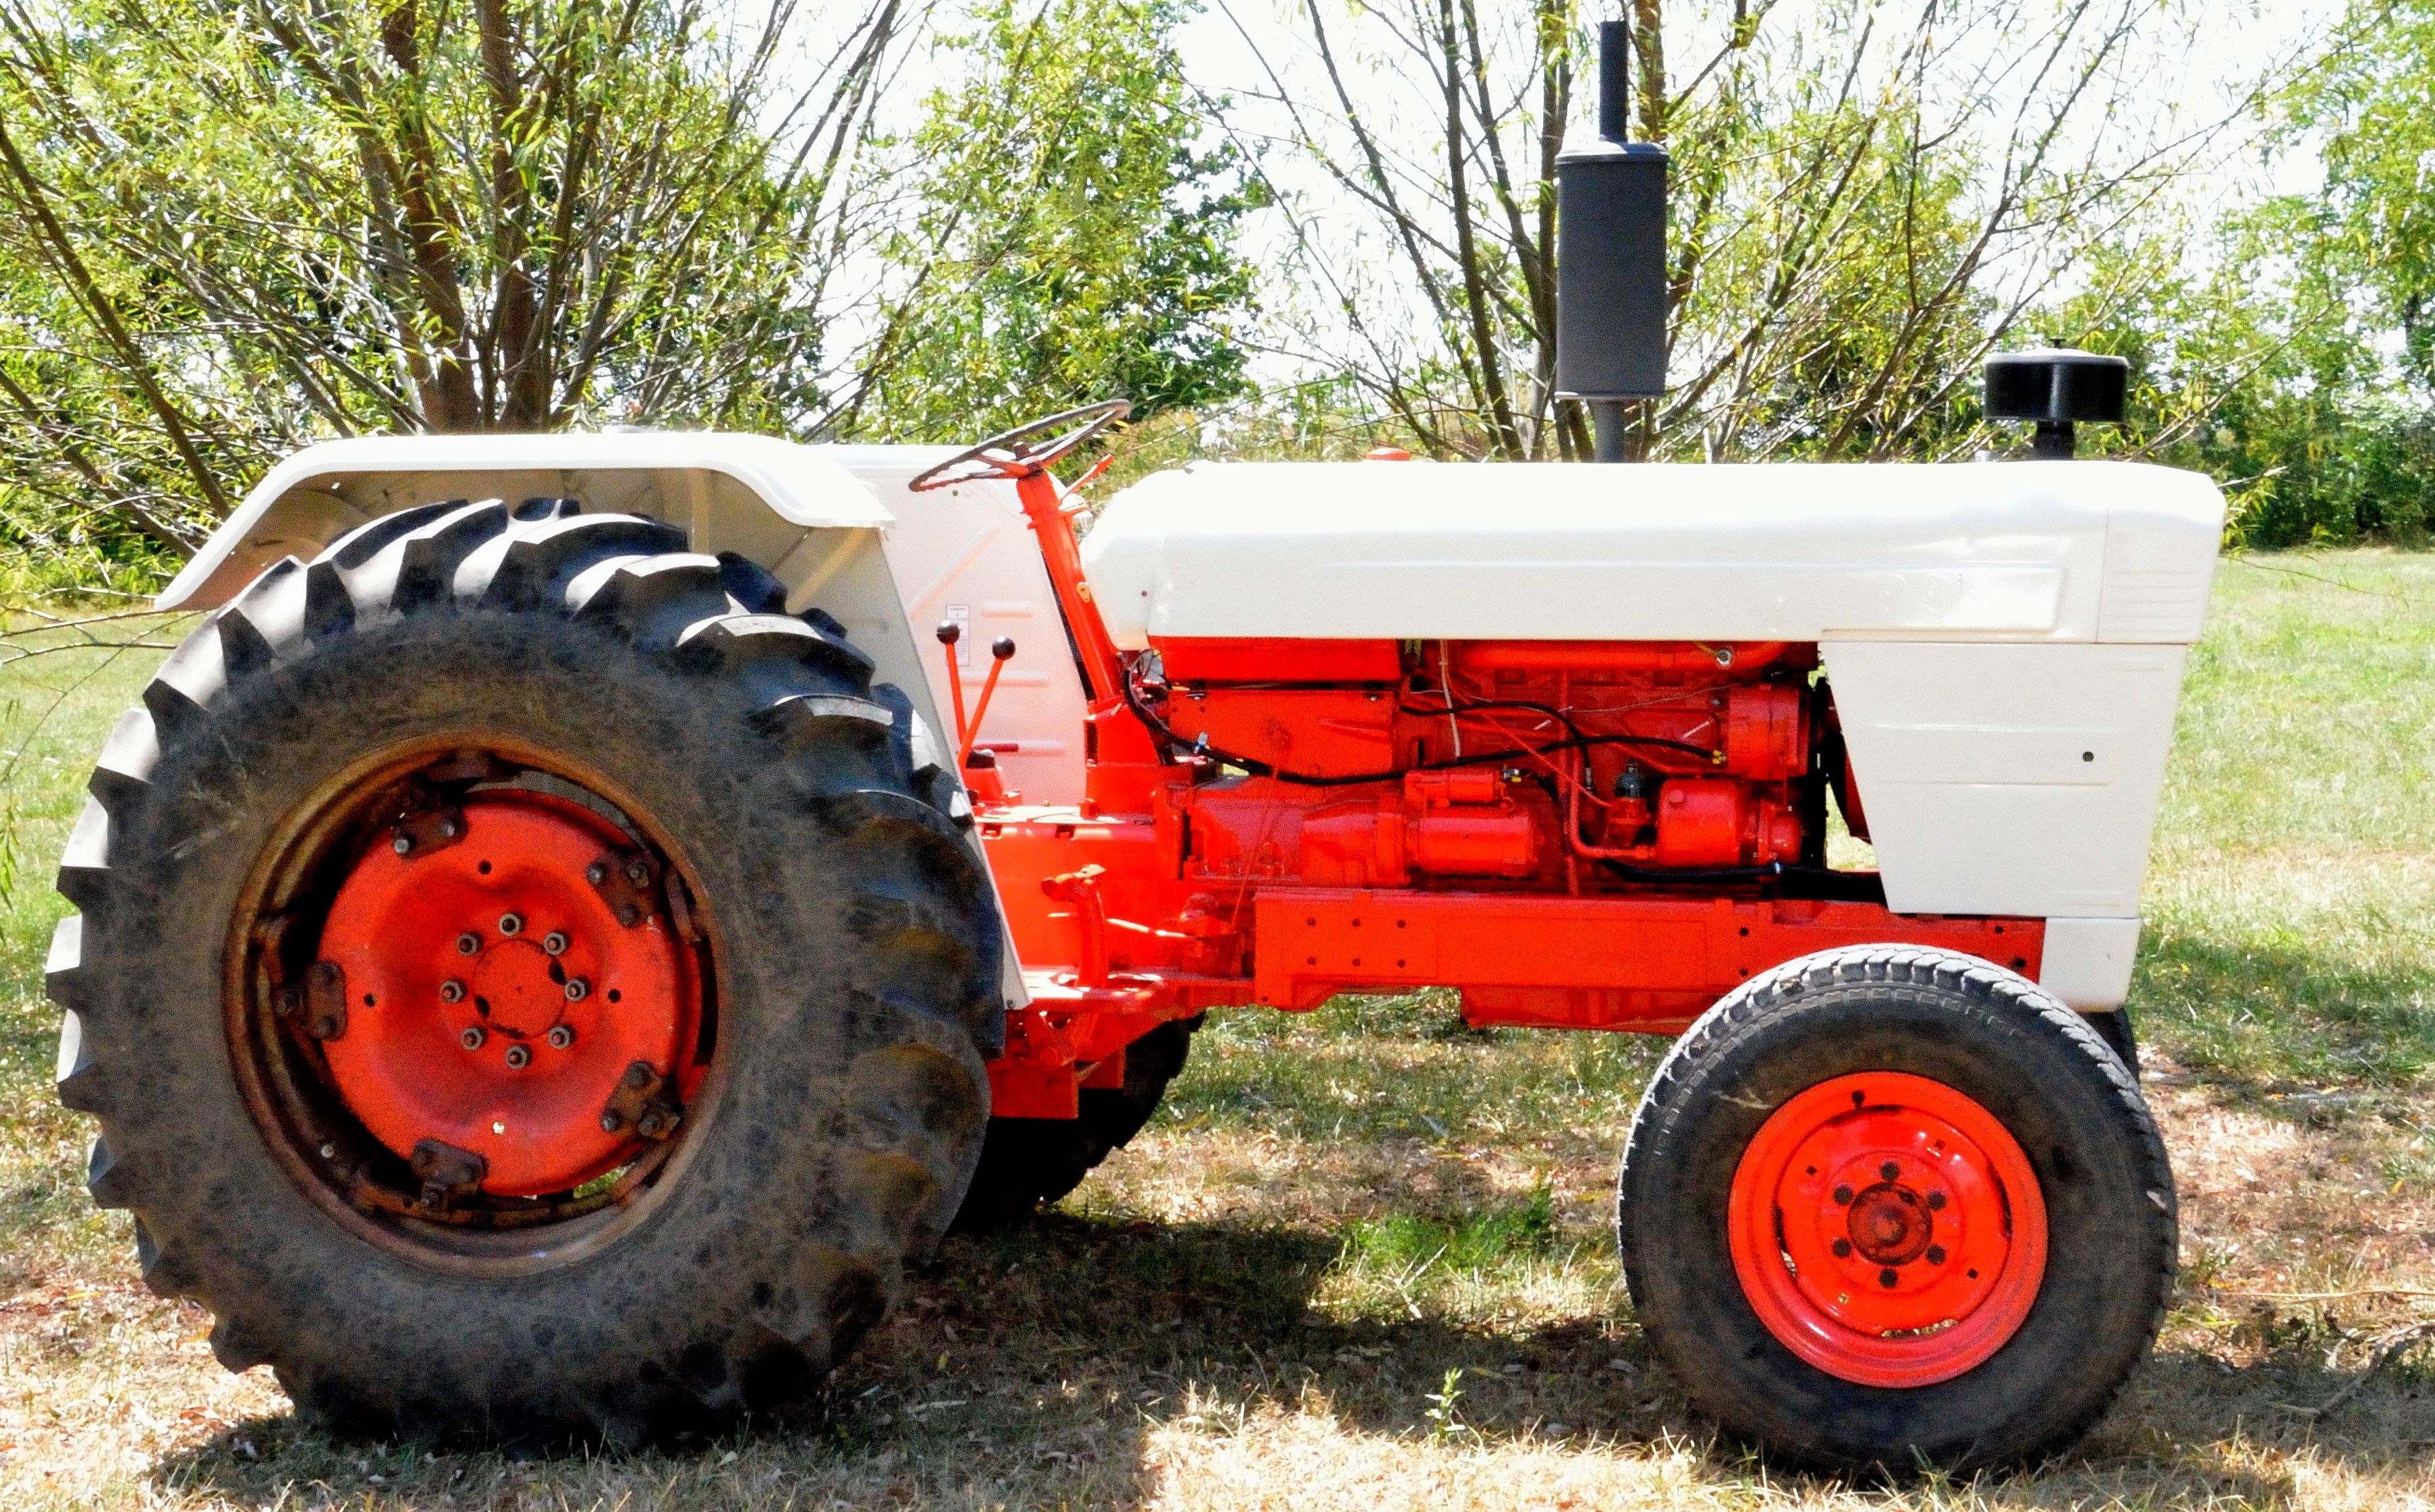 David Brown 995 Tractor with Case Loader